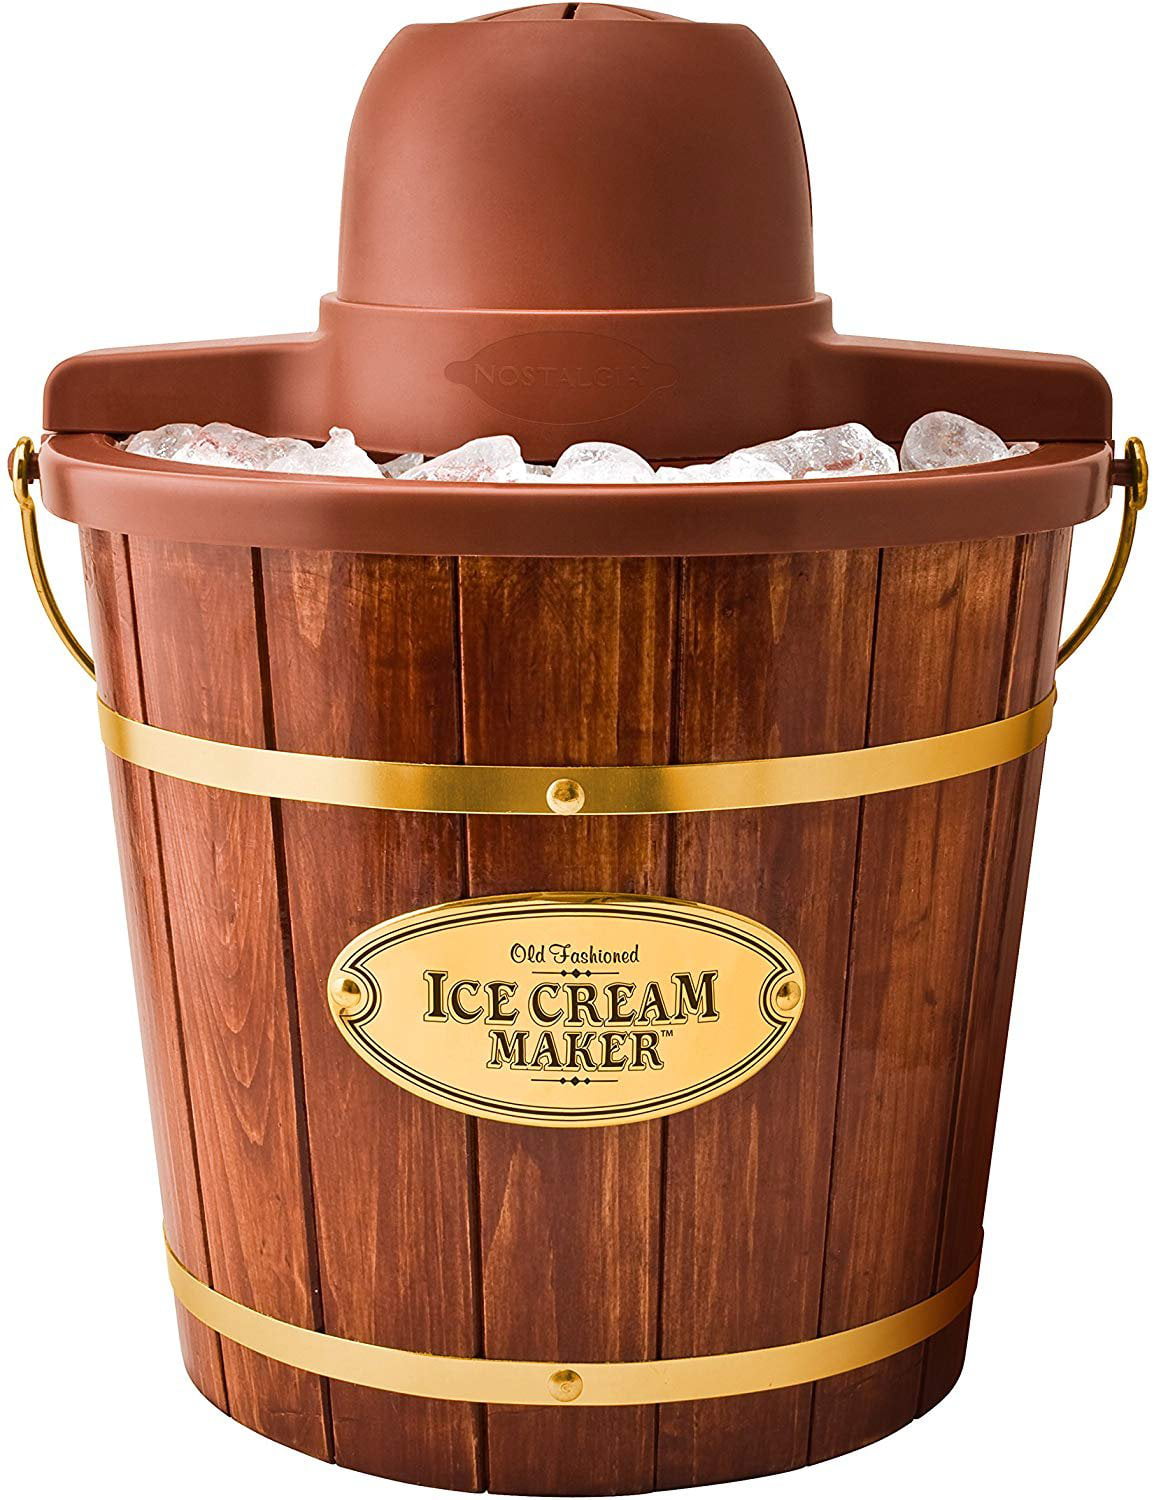 Nostalgia ICMW400 Electric Bucket Ice Cream Maker With Easy-Carry Handle,  Makes 4-Quarts in Minutes, Frozen Yogurt, Gelato, Made From Real Wood 